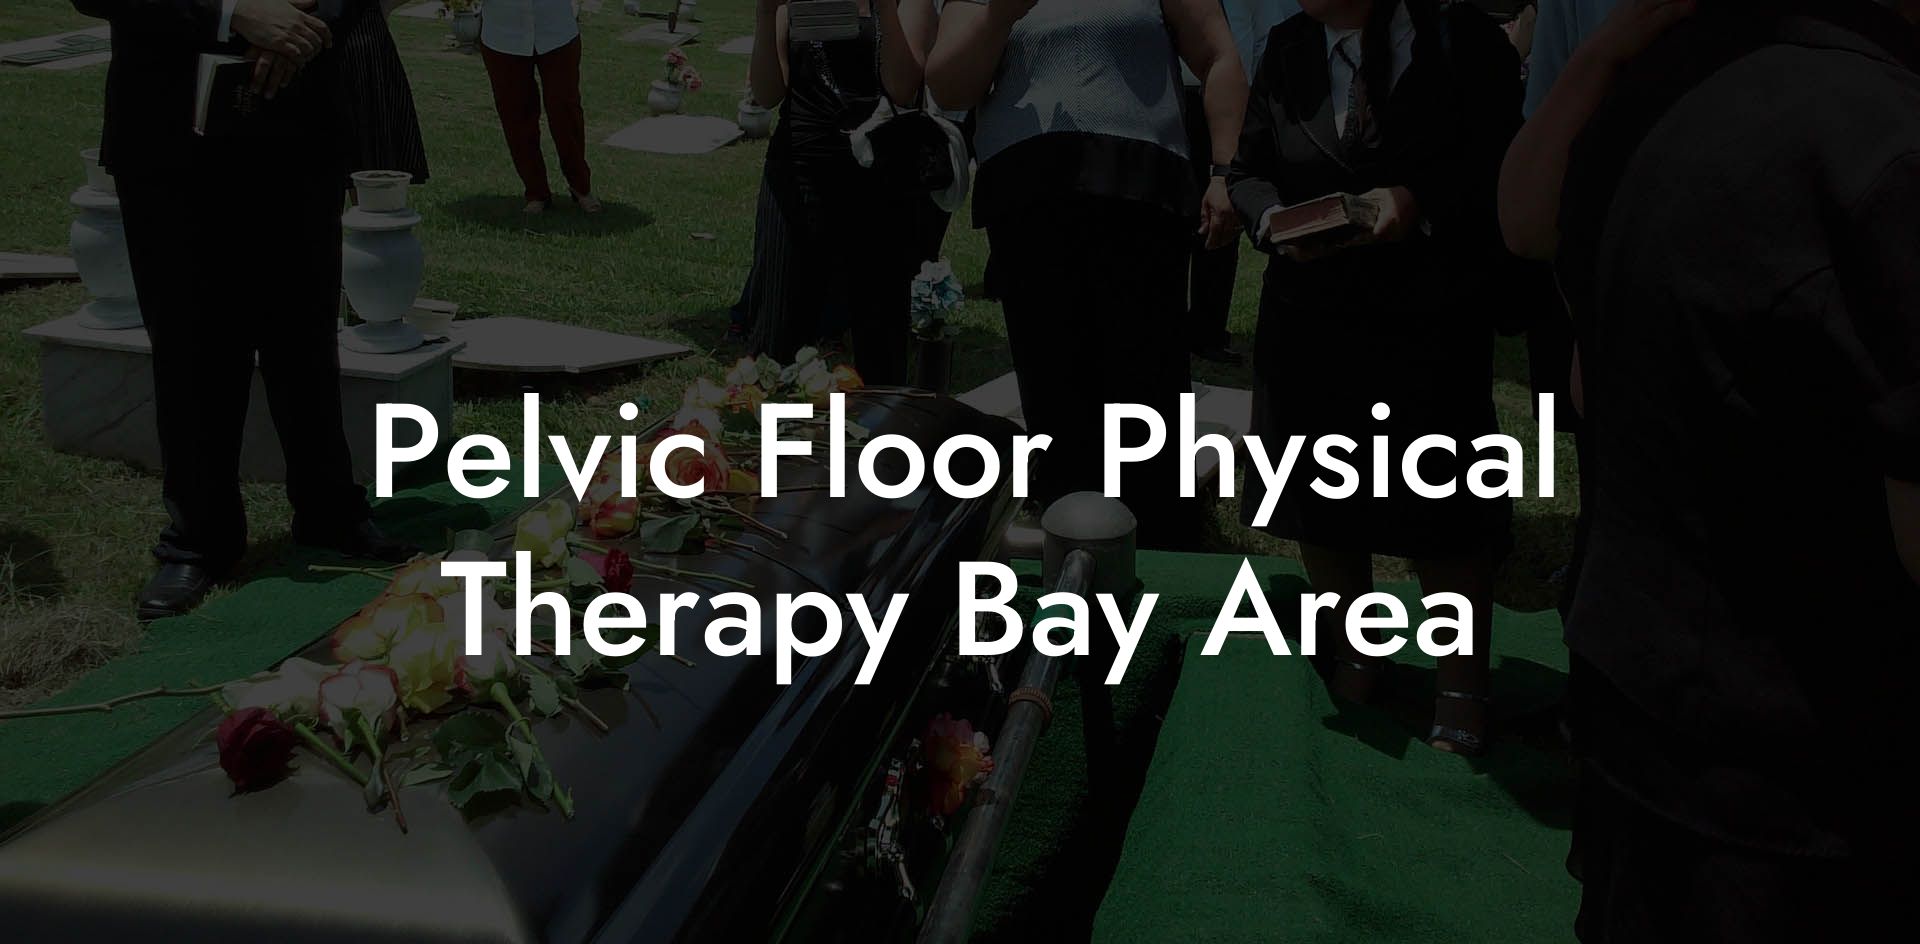 Pelvic Floor Physical Therapy Bay Area